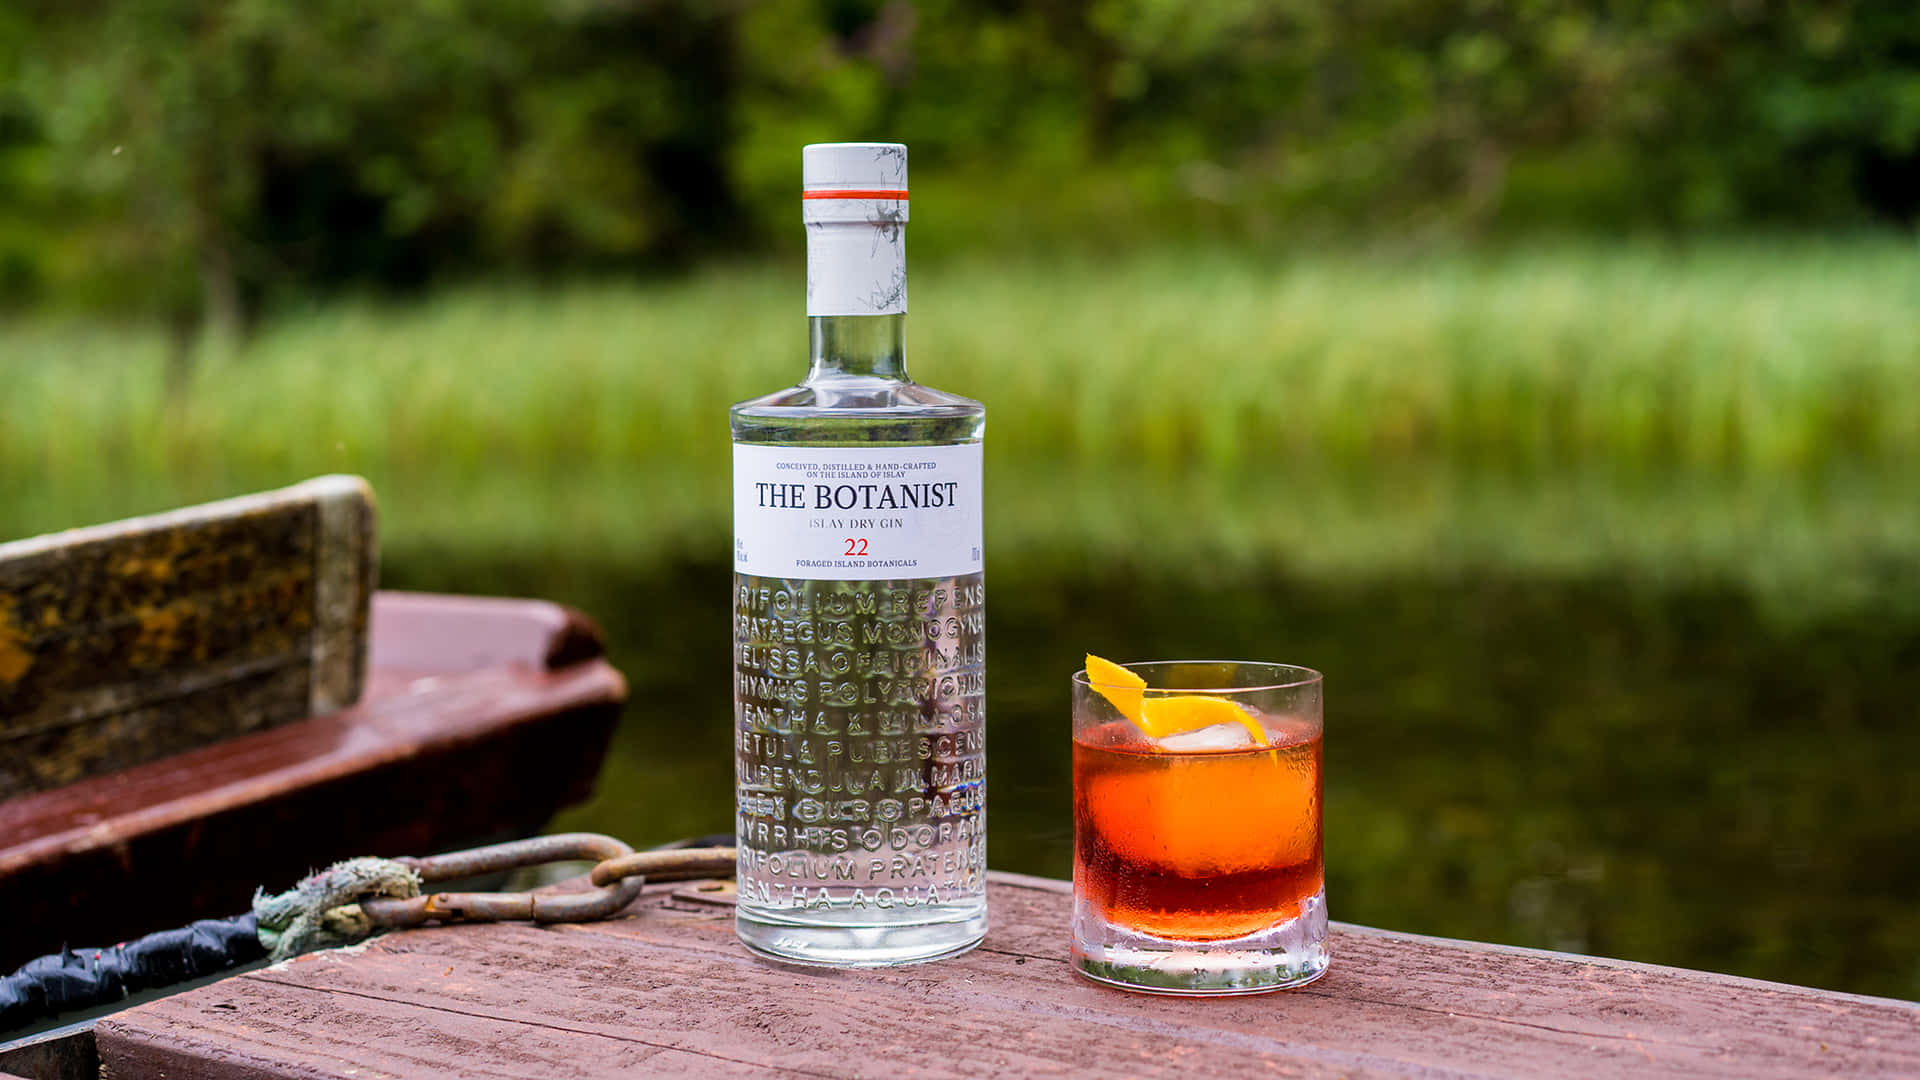 The Botanist Islay Dry Gin Alcoholic Drink By A Grassfield Wallpaper